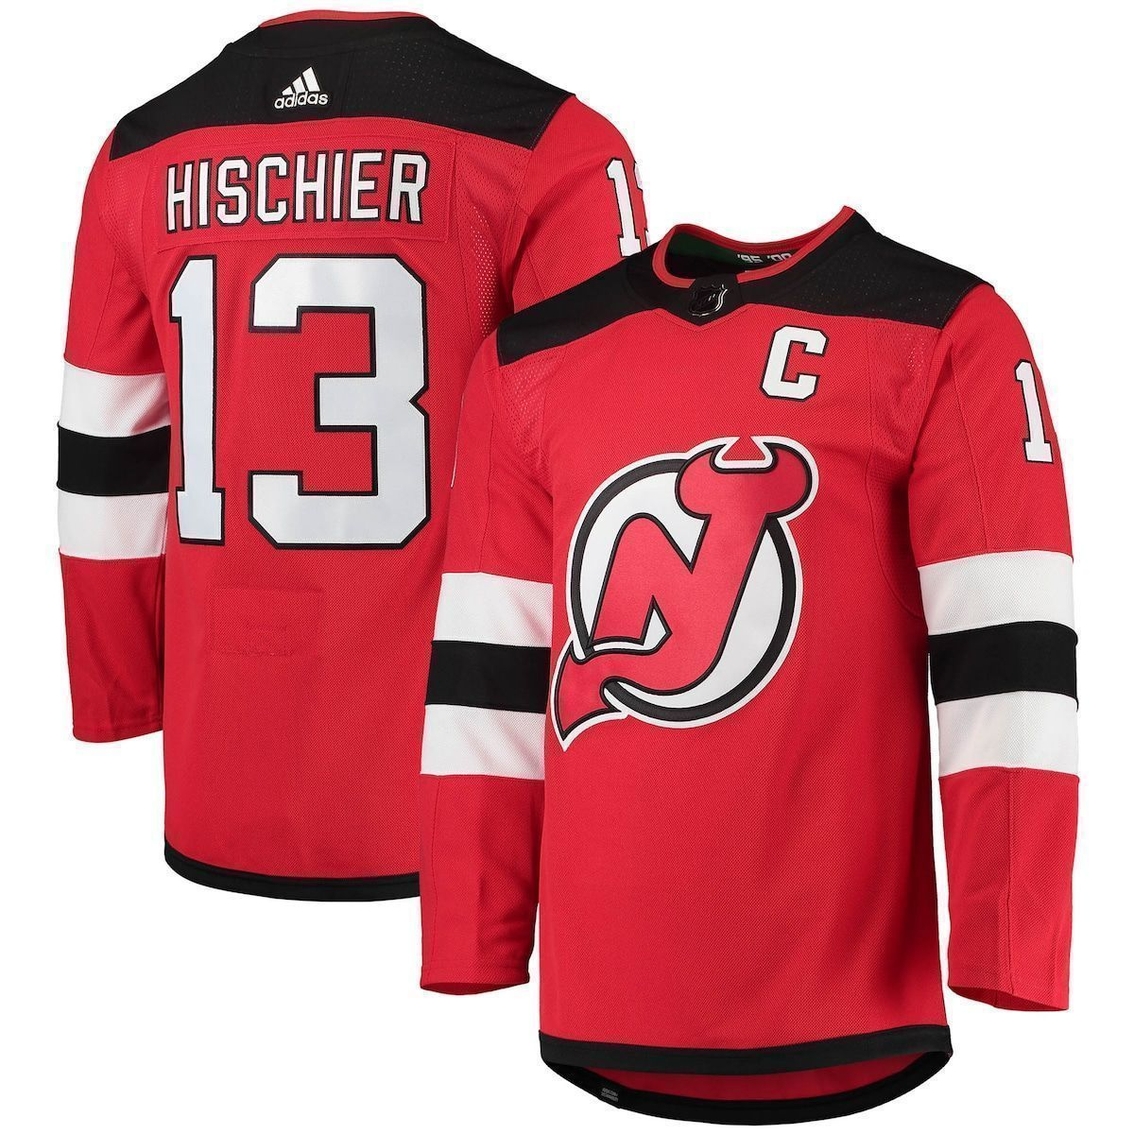 adidas Men's Nico Hischier Red New Jersey Devils Home Captain Patch Primegreen Authentic Pro Player Jersey - Image 2 of 4